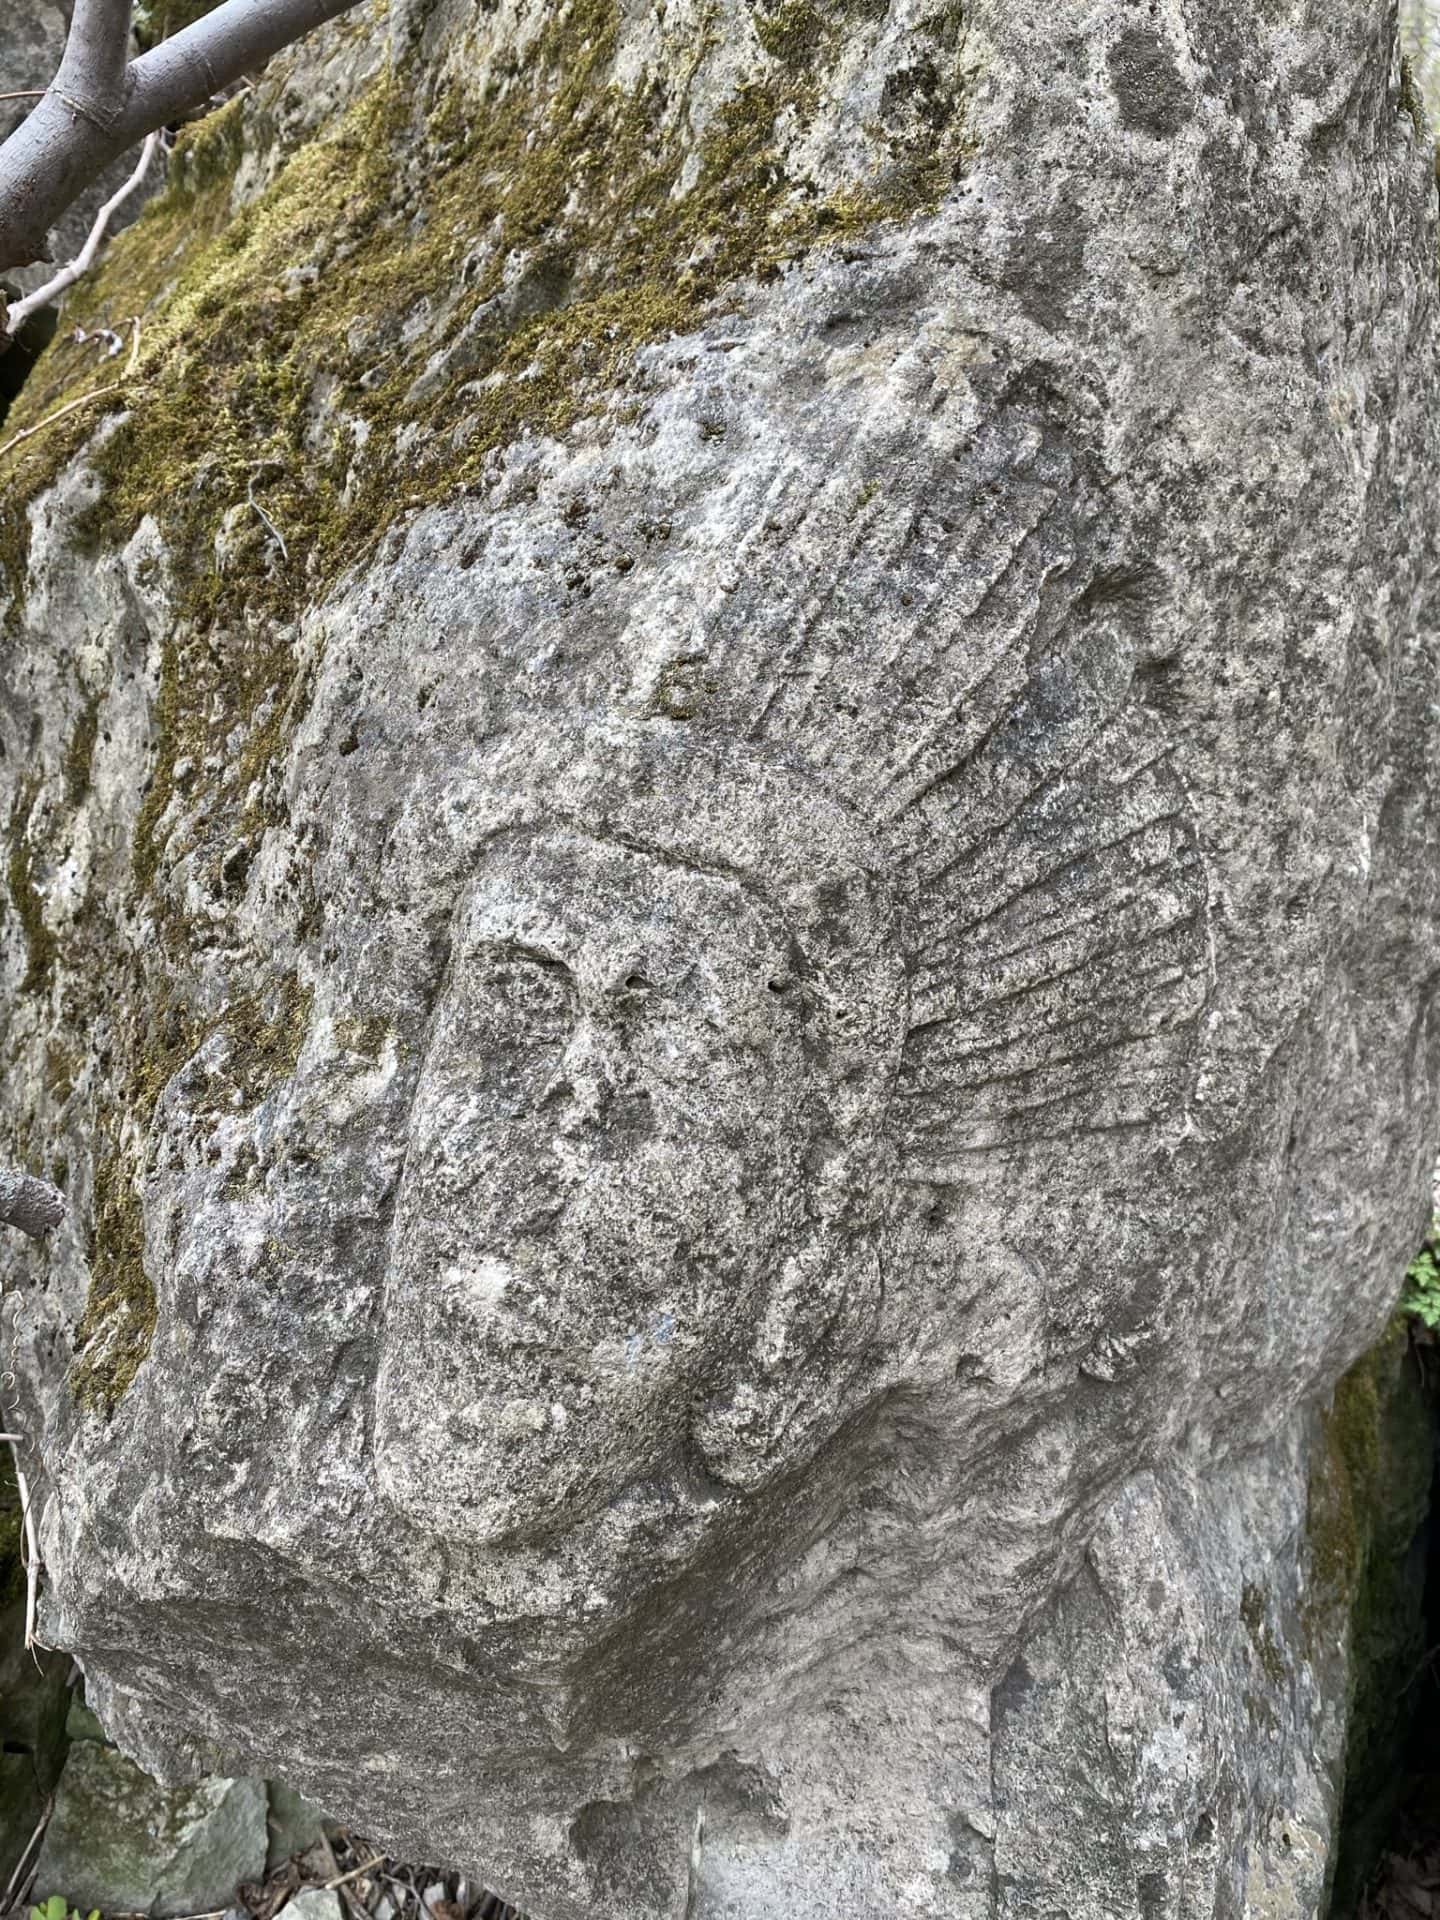 cave springs face in rock carving